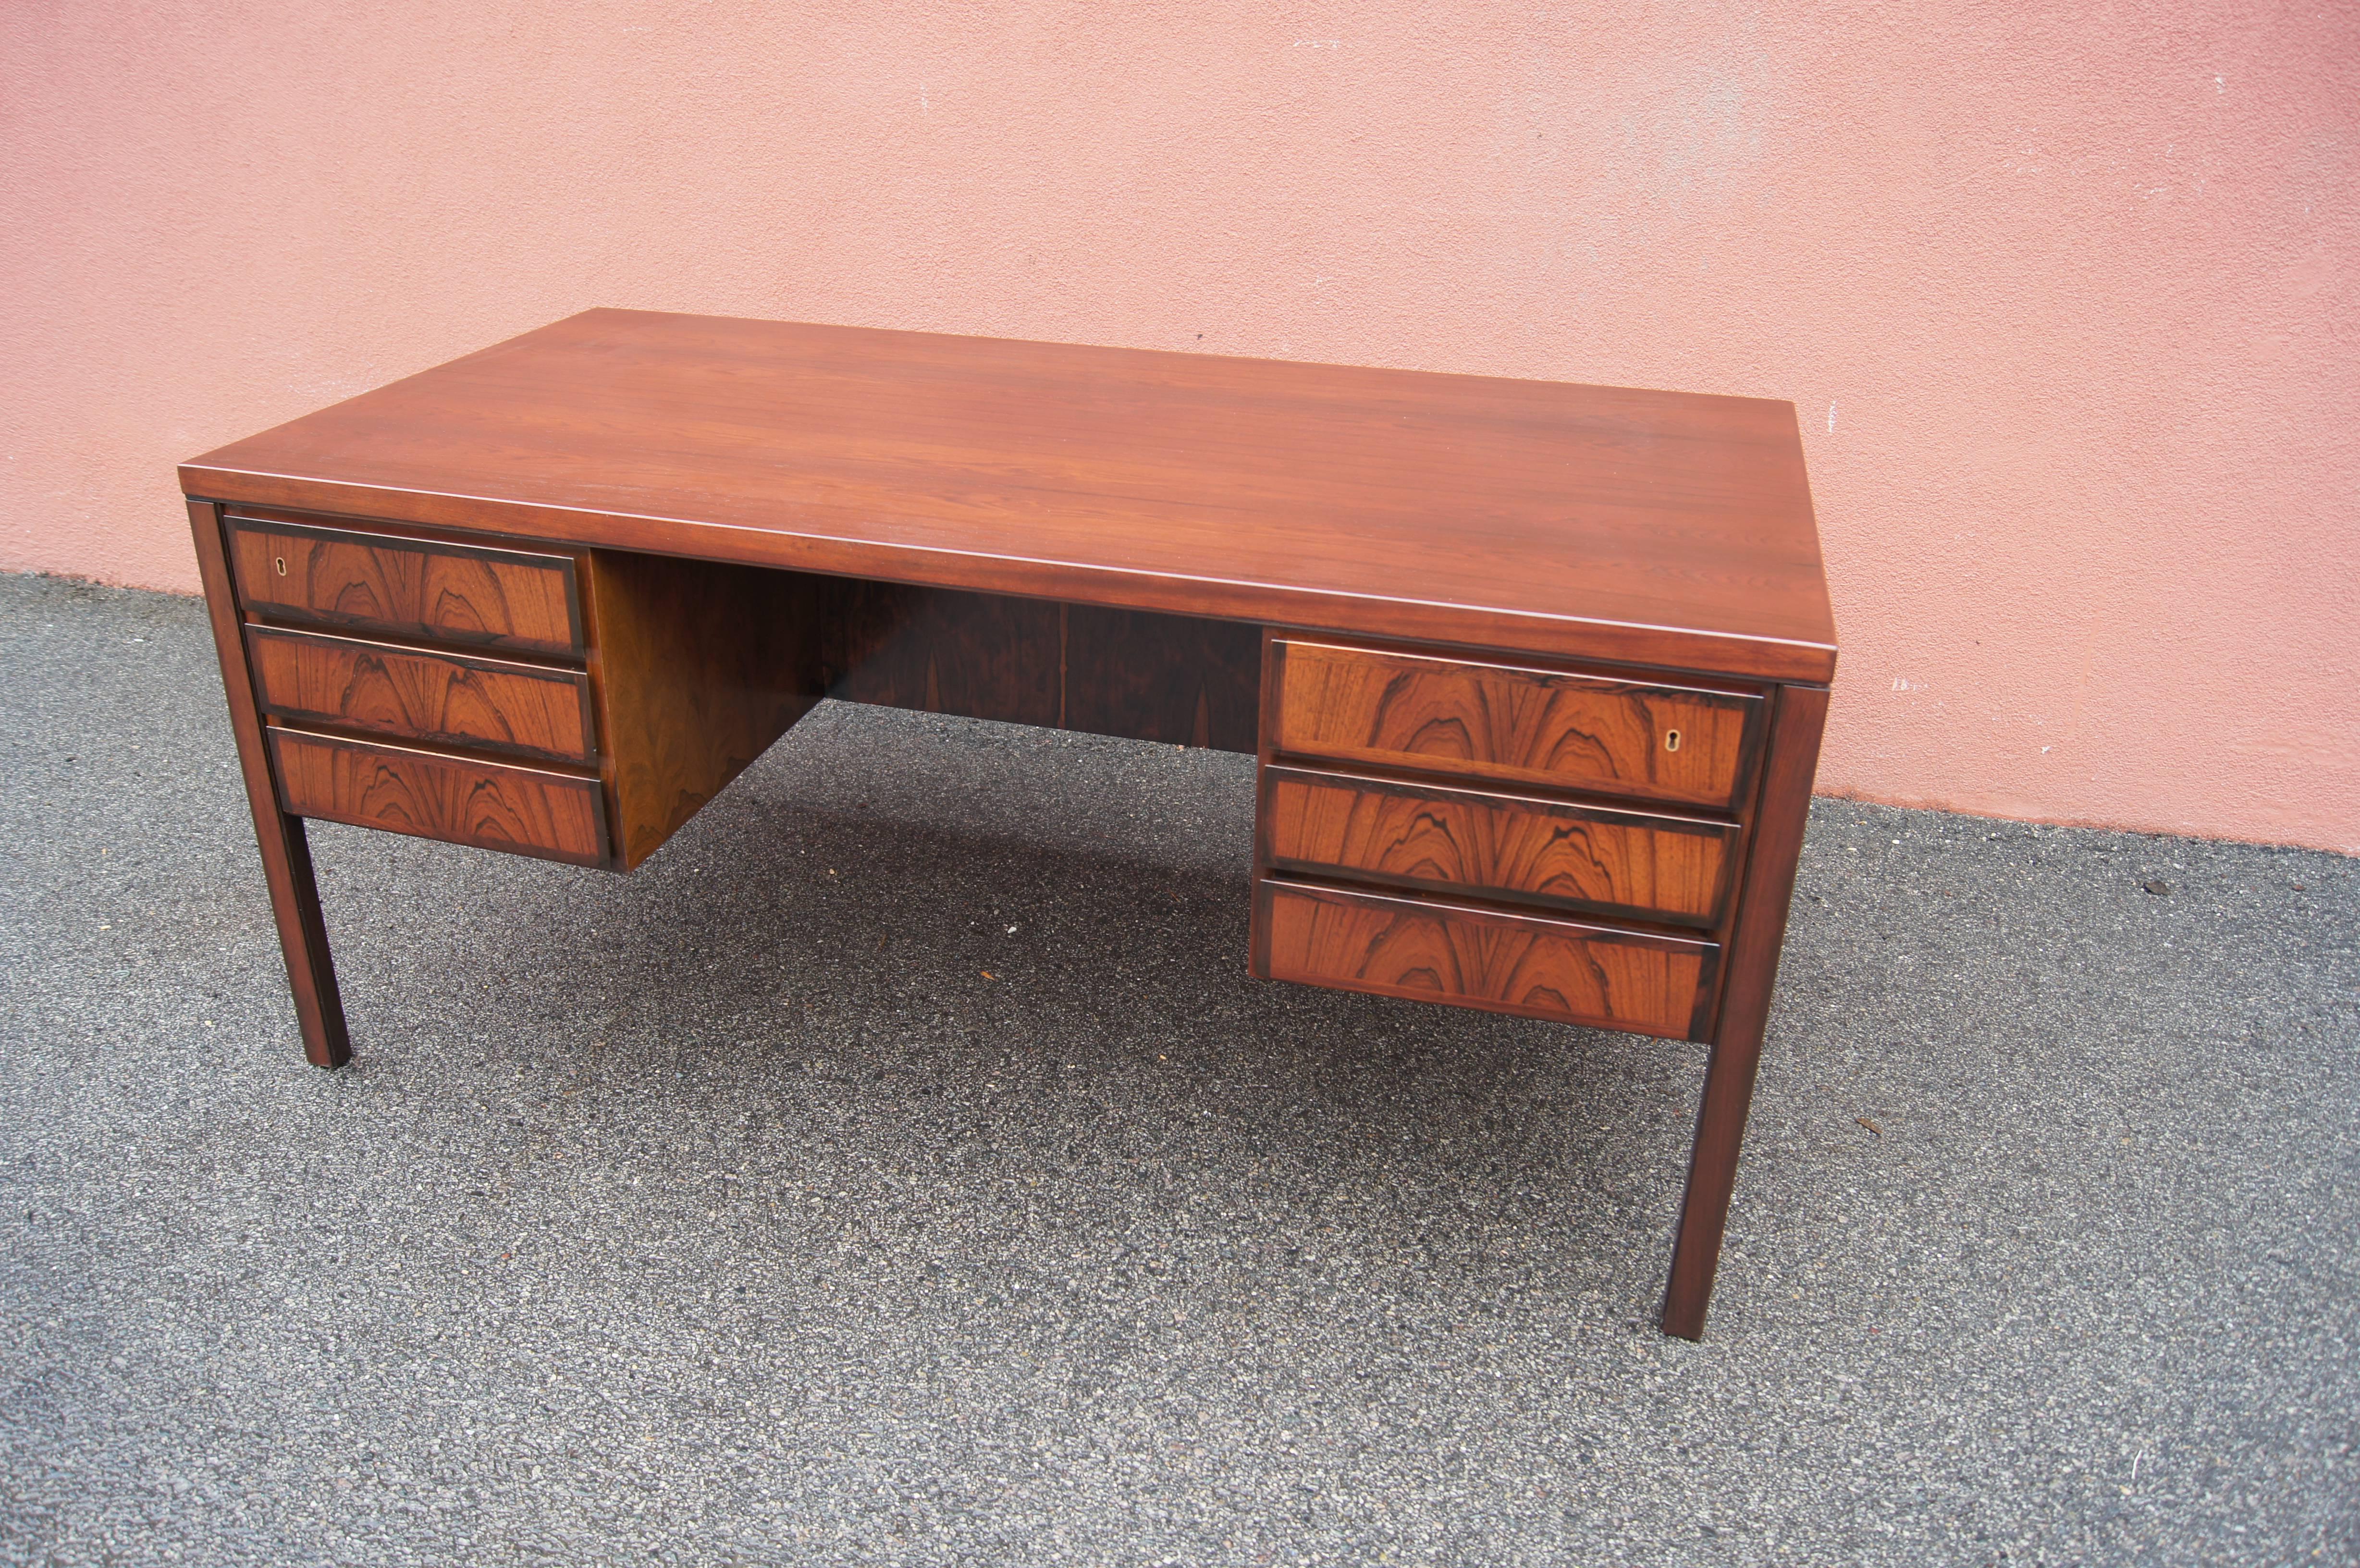 Gunni Omann designed this handsome, clean-lined rosewood desk, model 77, for Omann Jun Møbelfabrik in the 1960s. Three drawers sit either side of the chair-well, one of which has a built-in pen tray. The front of the desk features more storage